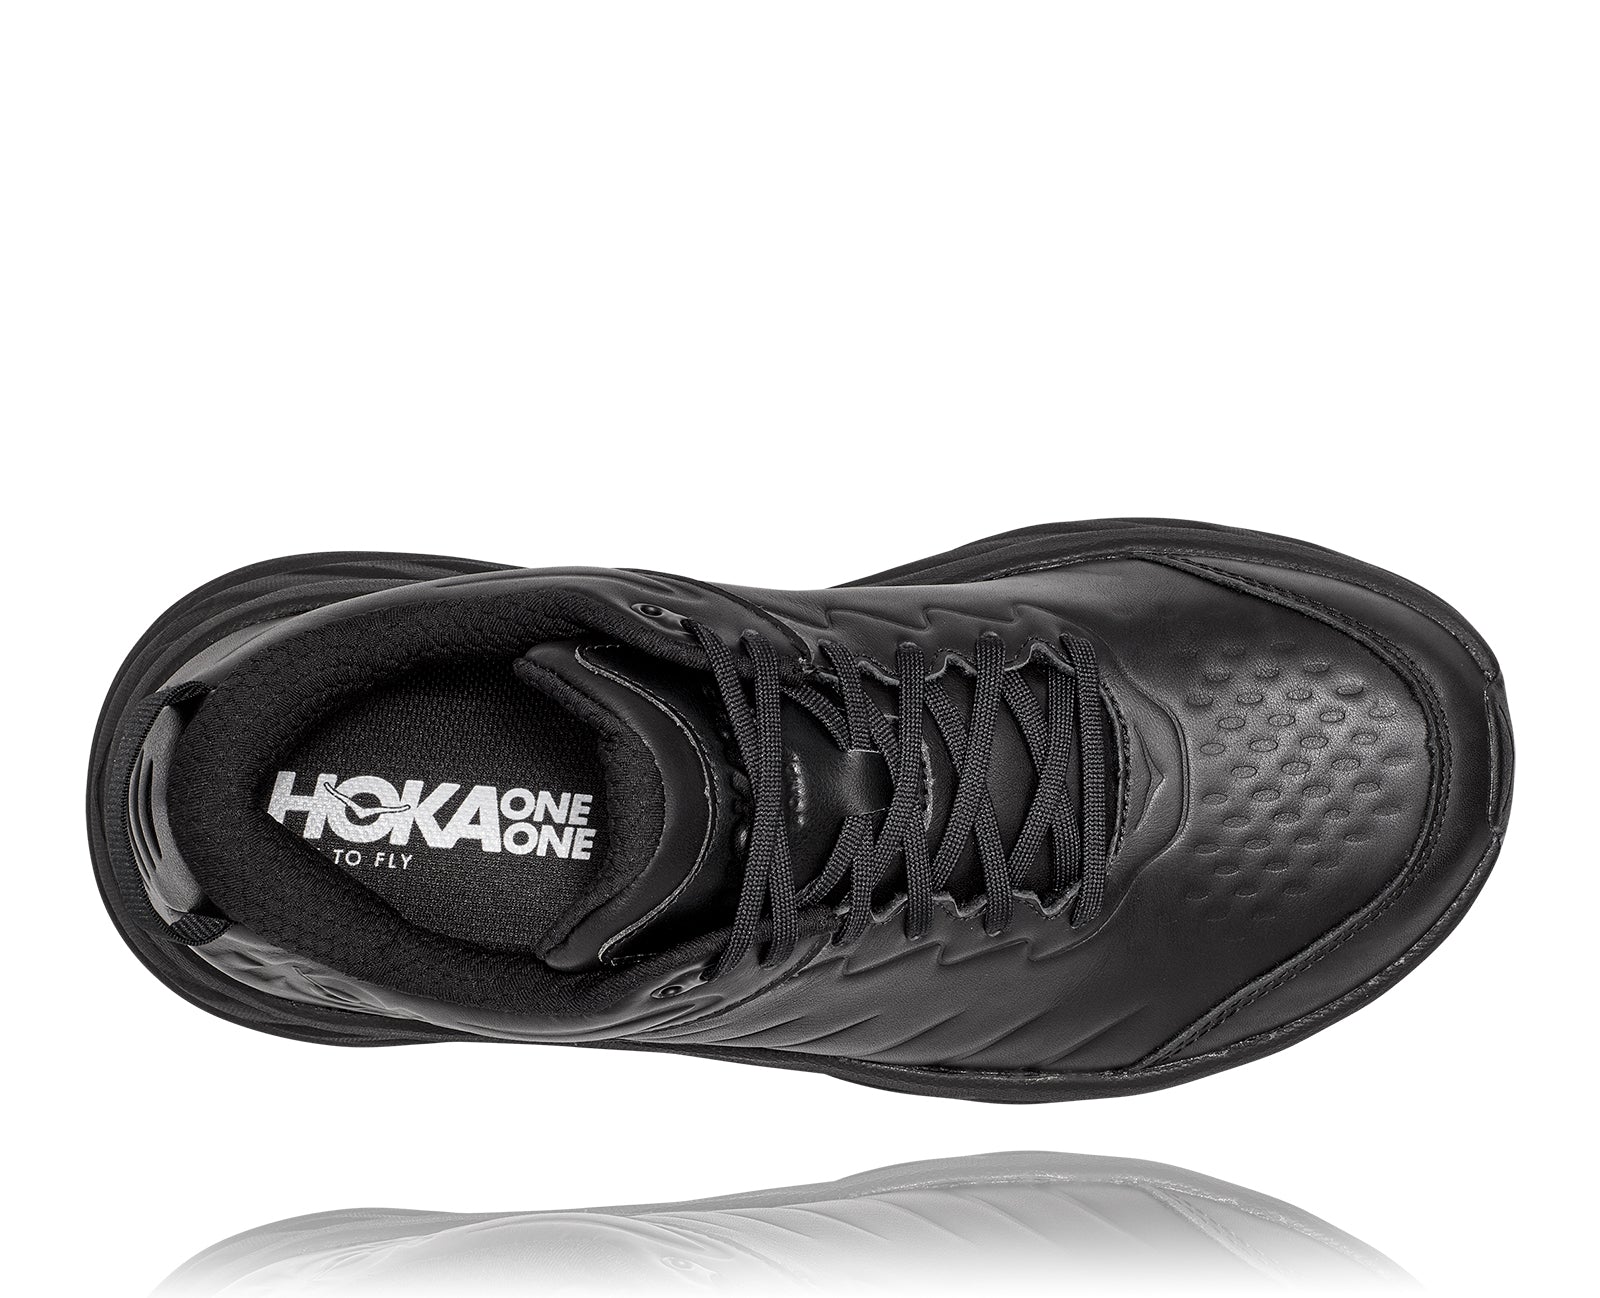 The Men's Hoka Bondi SR features a water-resistant leather upper along with a slip-resistant outsole.